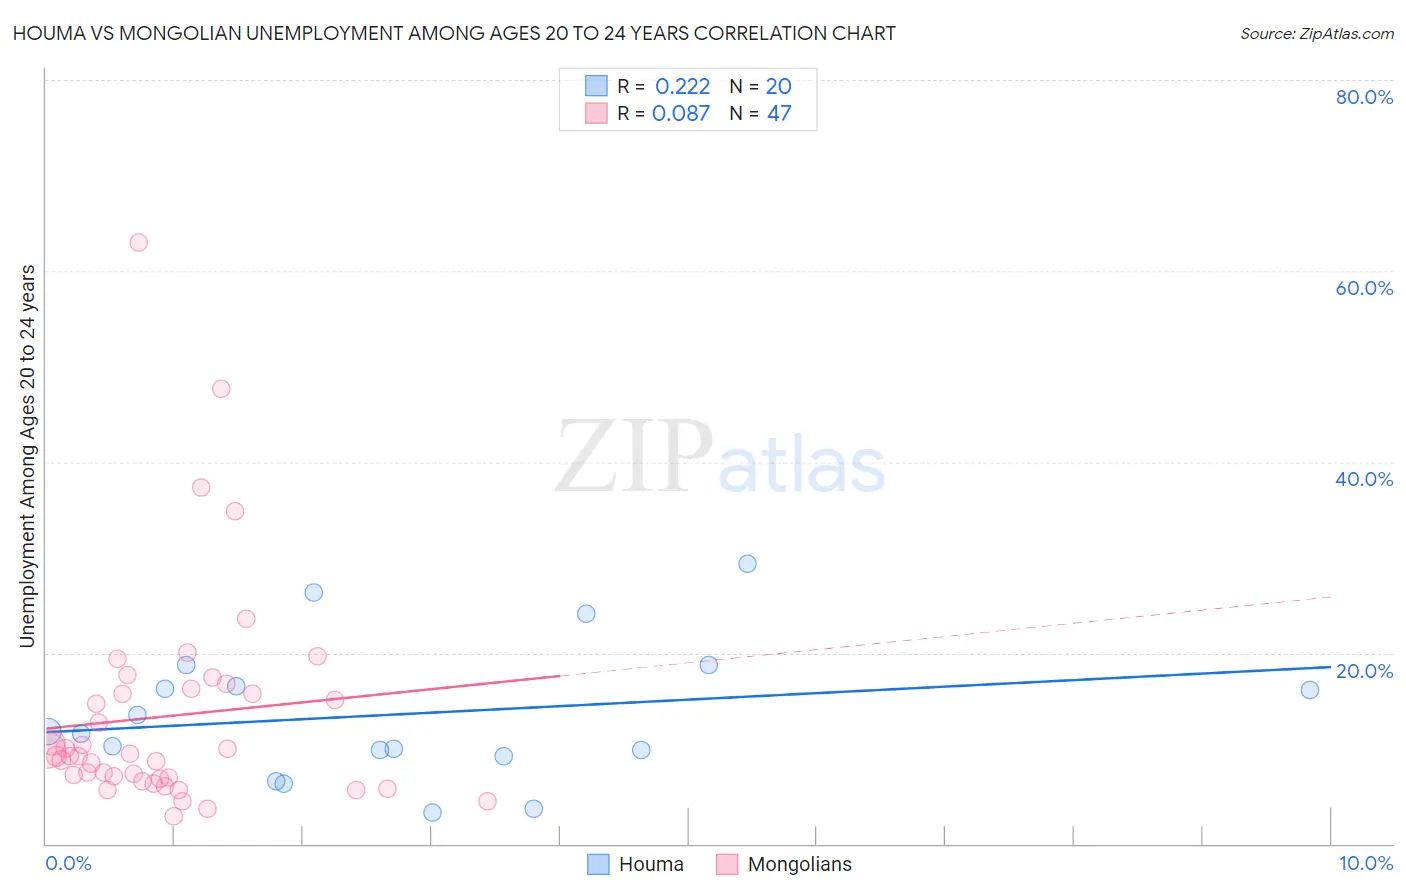 Houma vs Mongolian Unemployment Among Ages 20 to 24 years